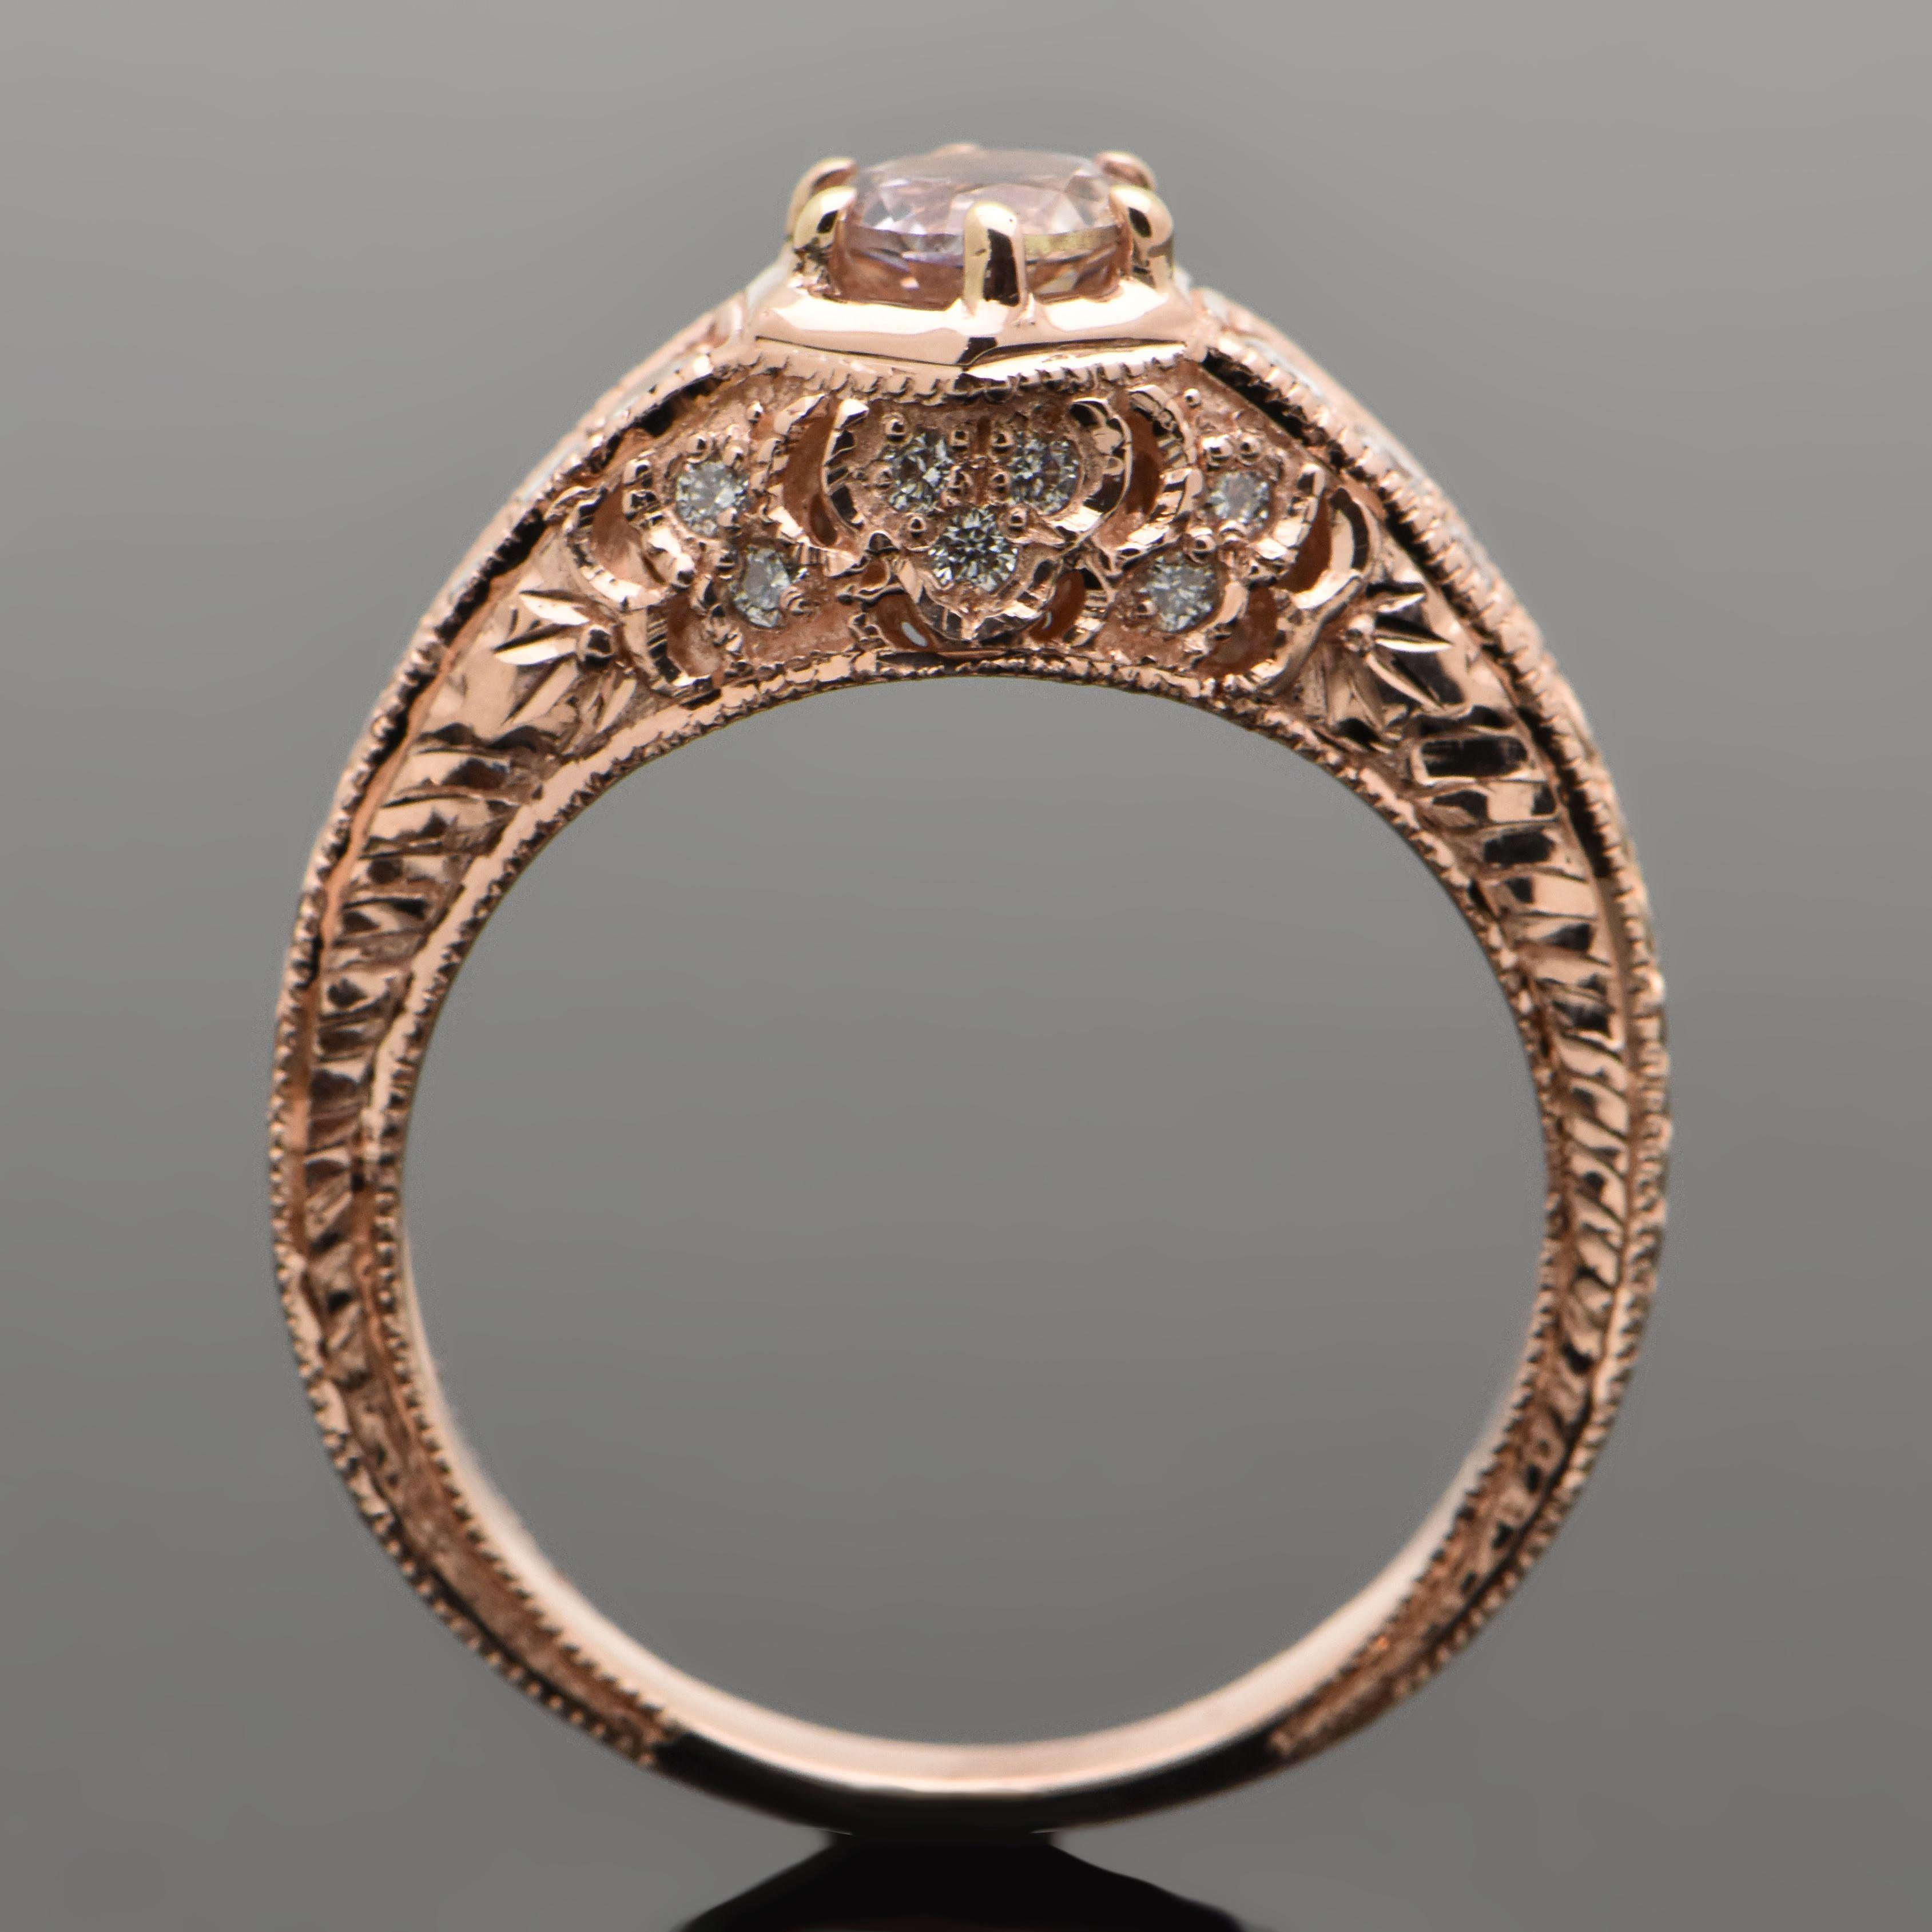 This vintage remake 14kt rose gold ring is set with a round brilliant-cut pink sapphire at an estimated weight 0.30ct. Shoulders are accented with 3 diamonds on each side and accent diamonds throughout setting. Diamonds are an estimated  0.17 cttw.